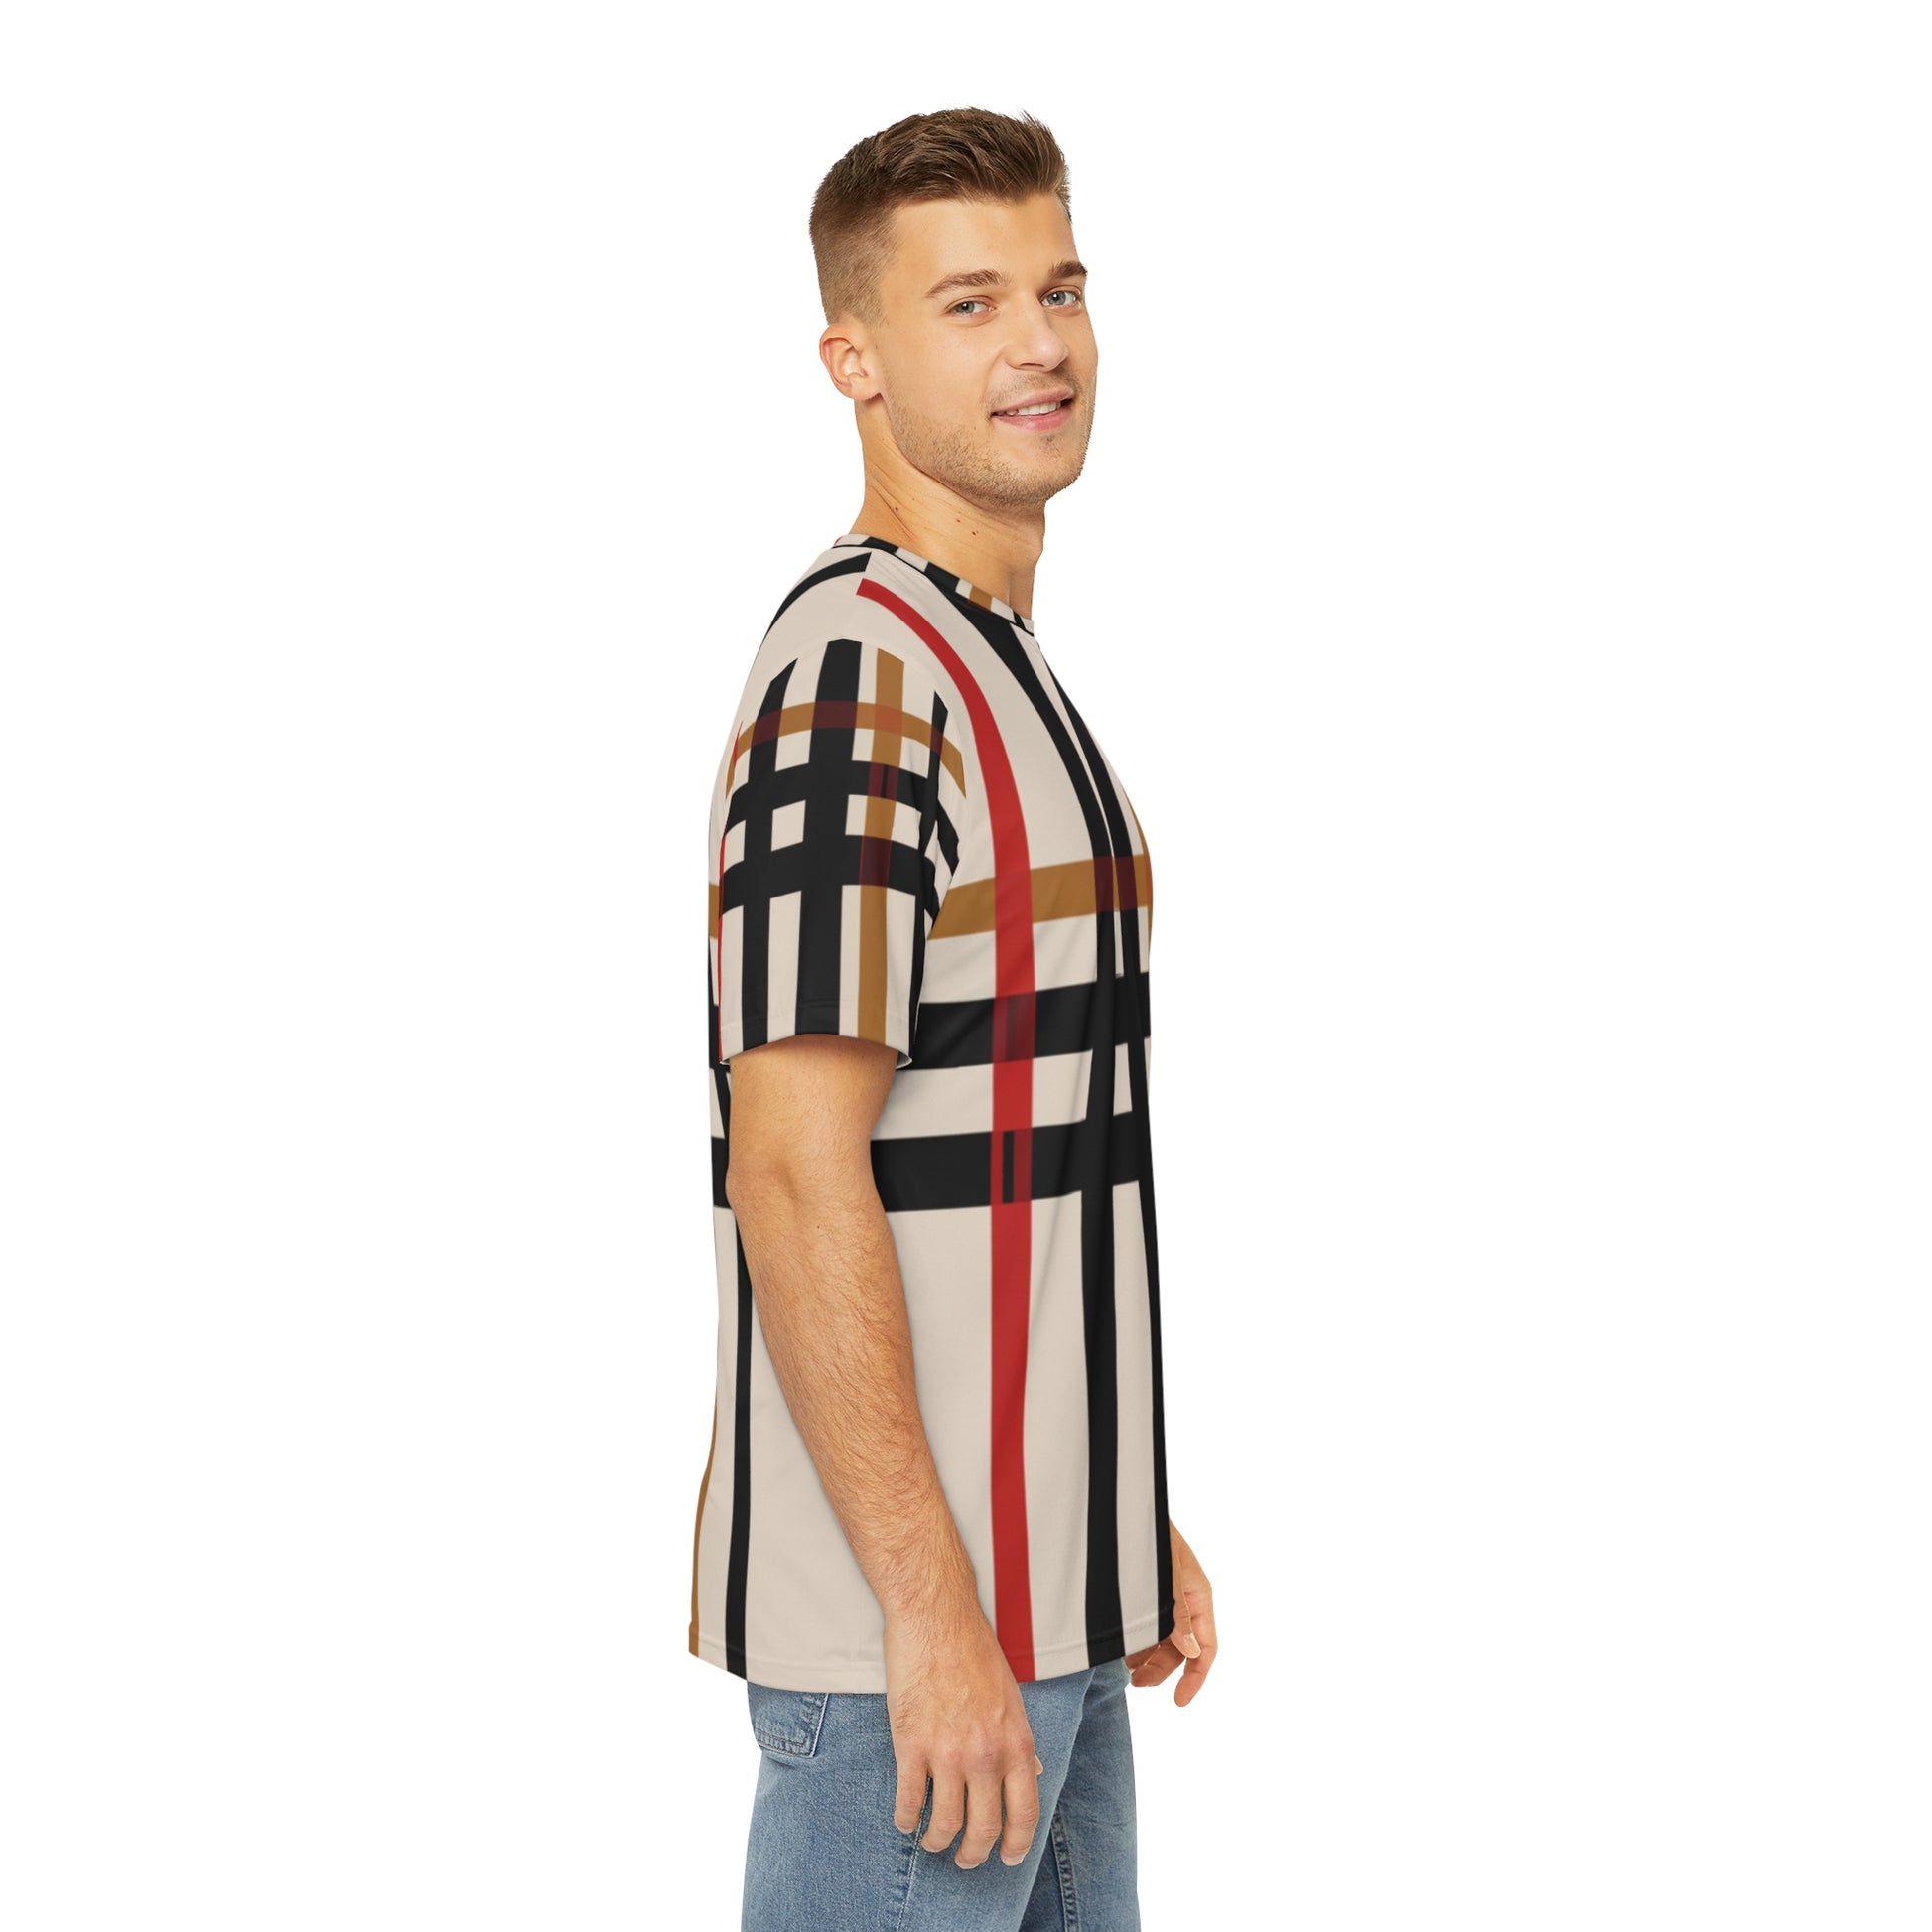 Side view of the Highland Ember Dawn Crewneck Pullover All-Over Print Short-Sleeved Shirt black red mustard yellow beige plaid pattern paired with casual denim jeans worn by white man